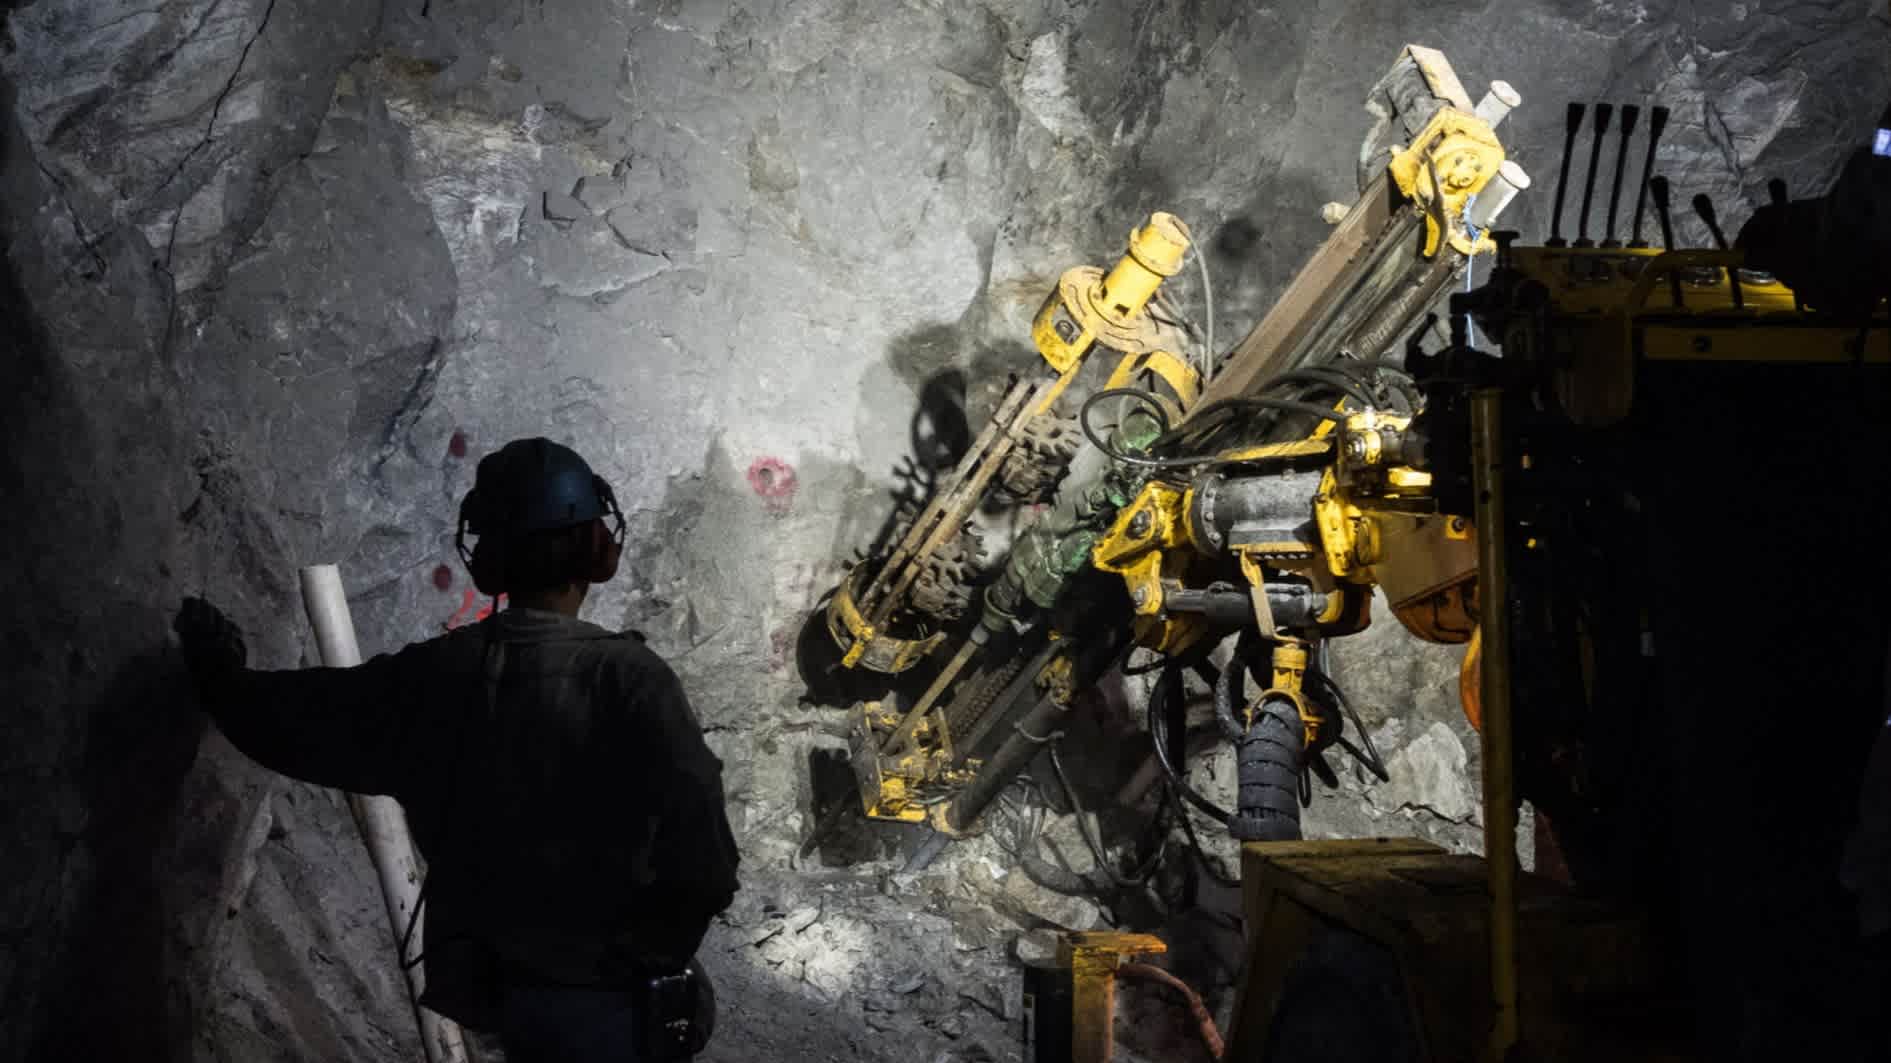 Mexican mining industry under threat from sweeping new regulations